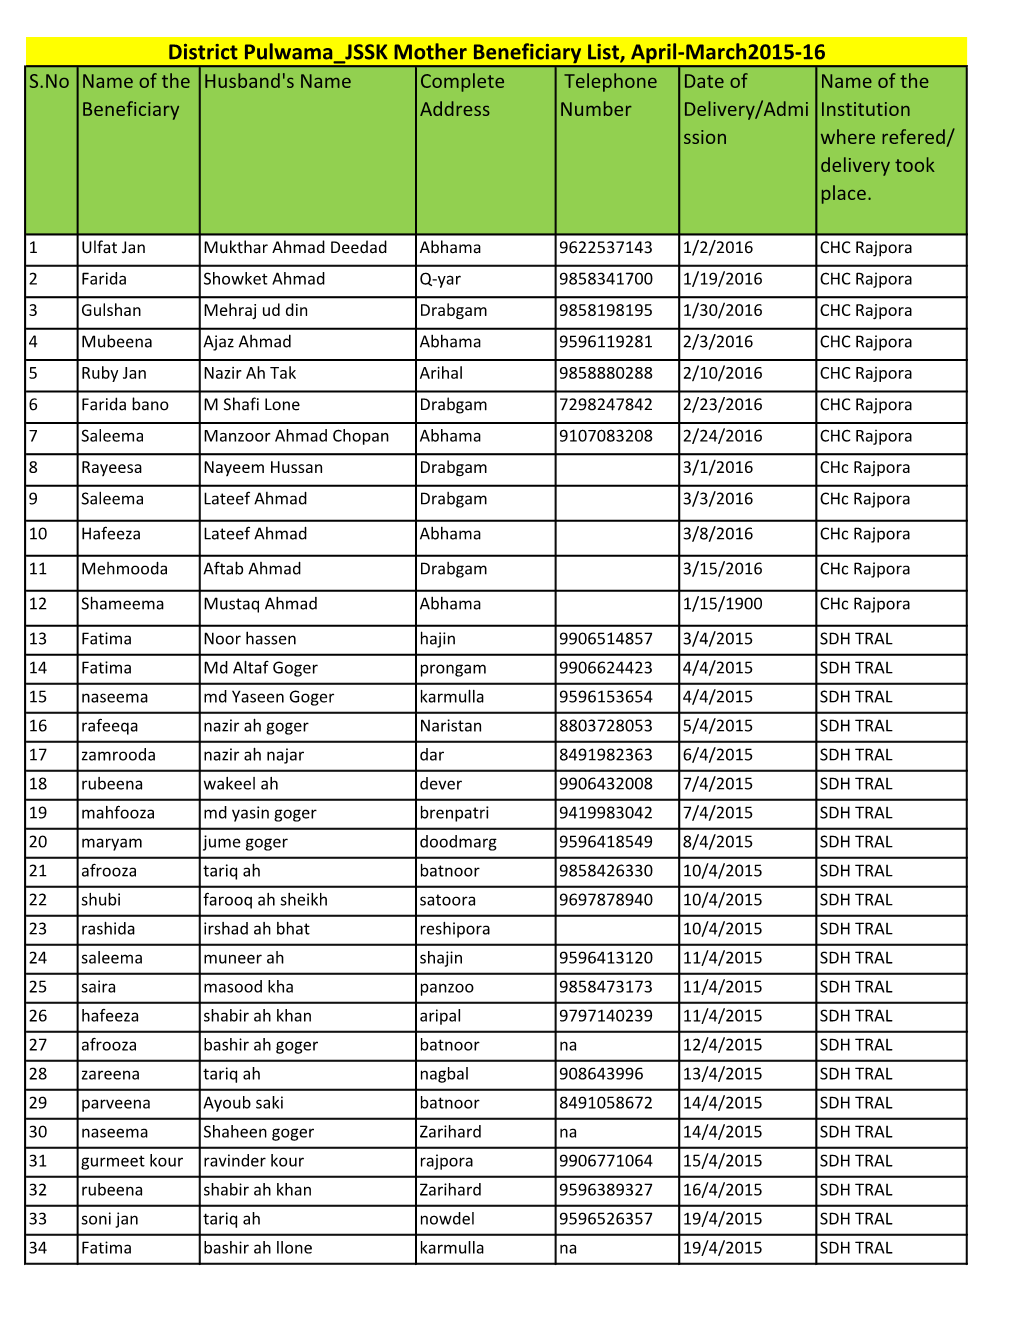 District Pulwama JSSK Mother Beneficiary List, April-March2015-16